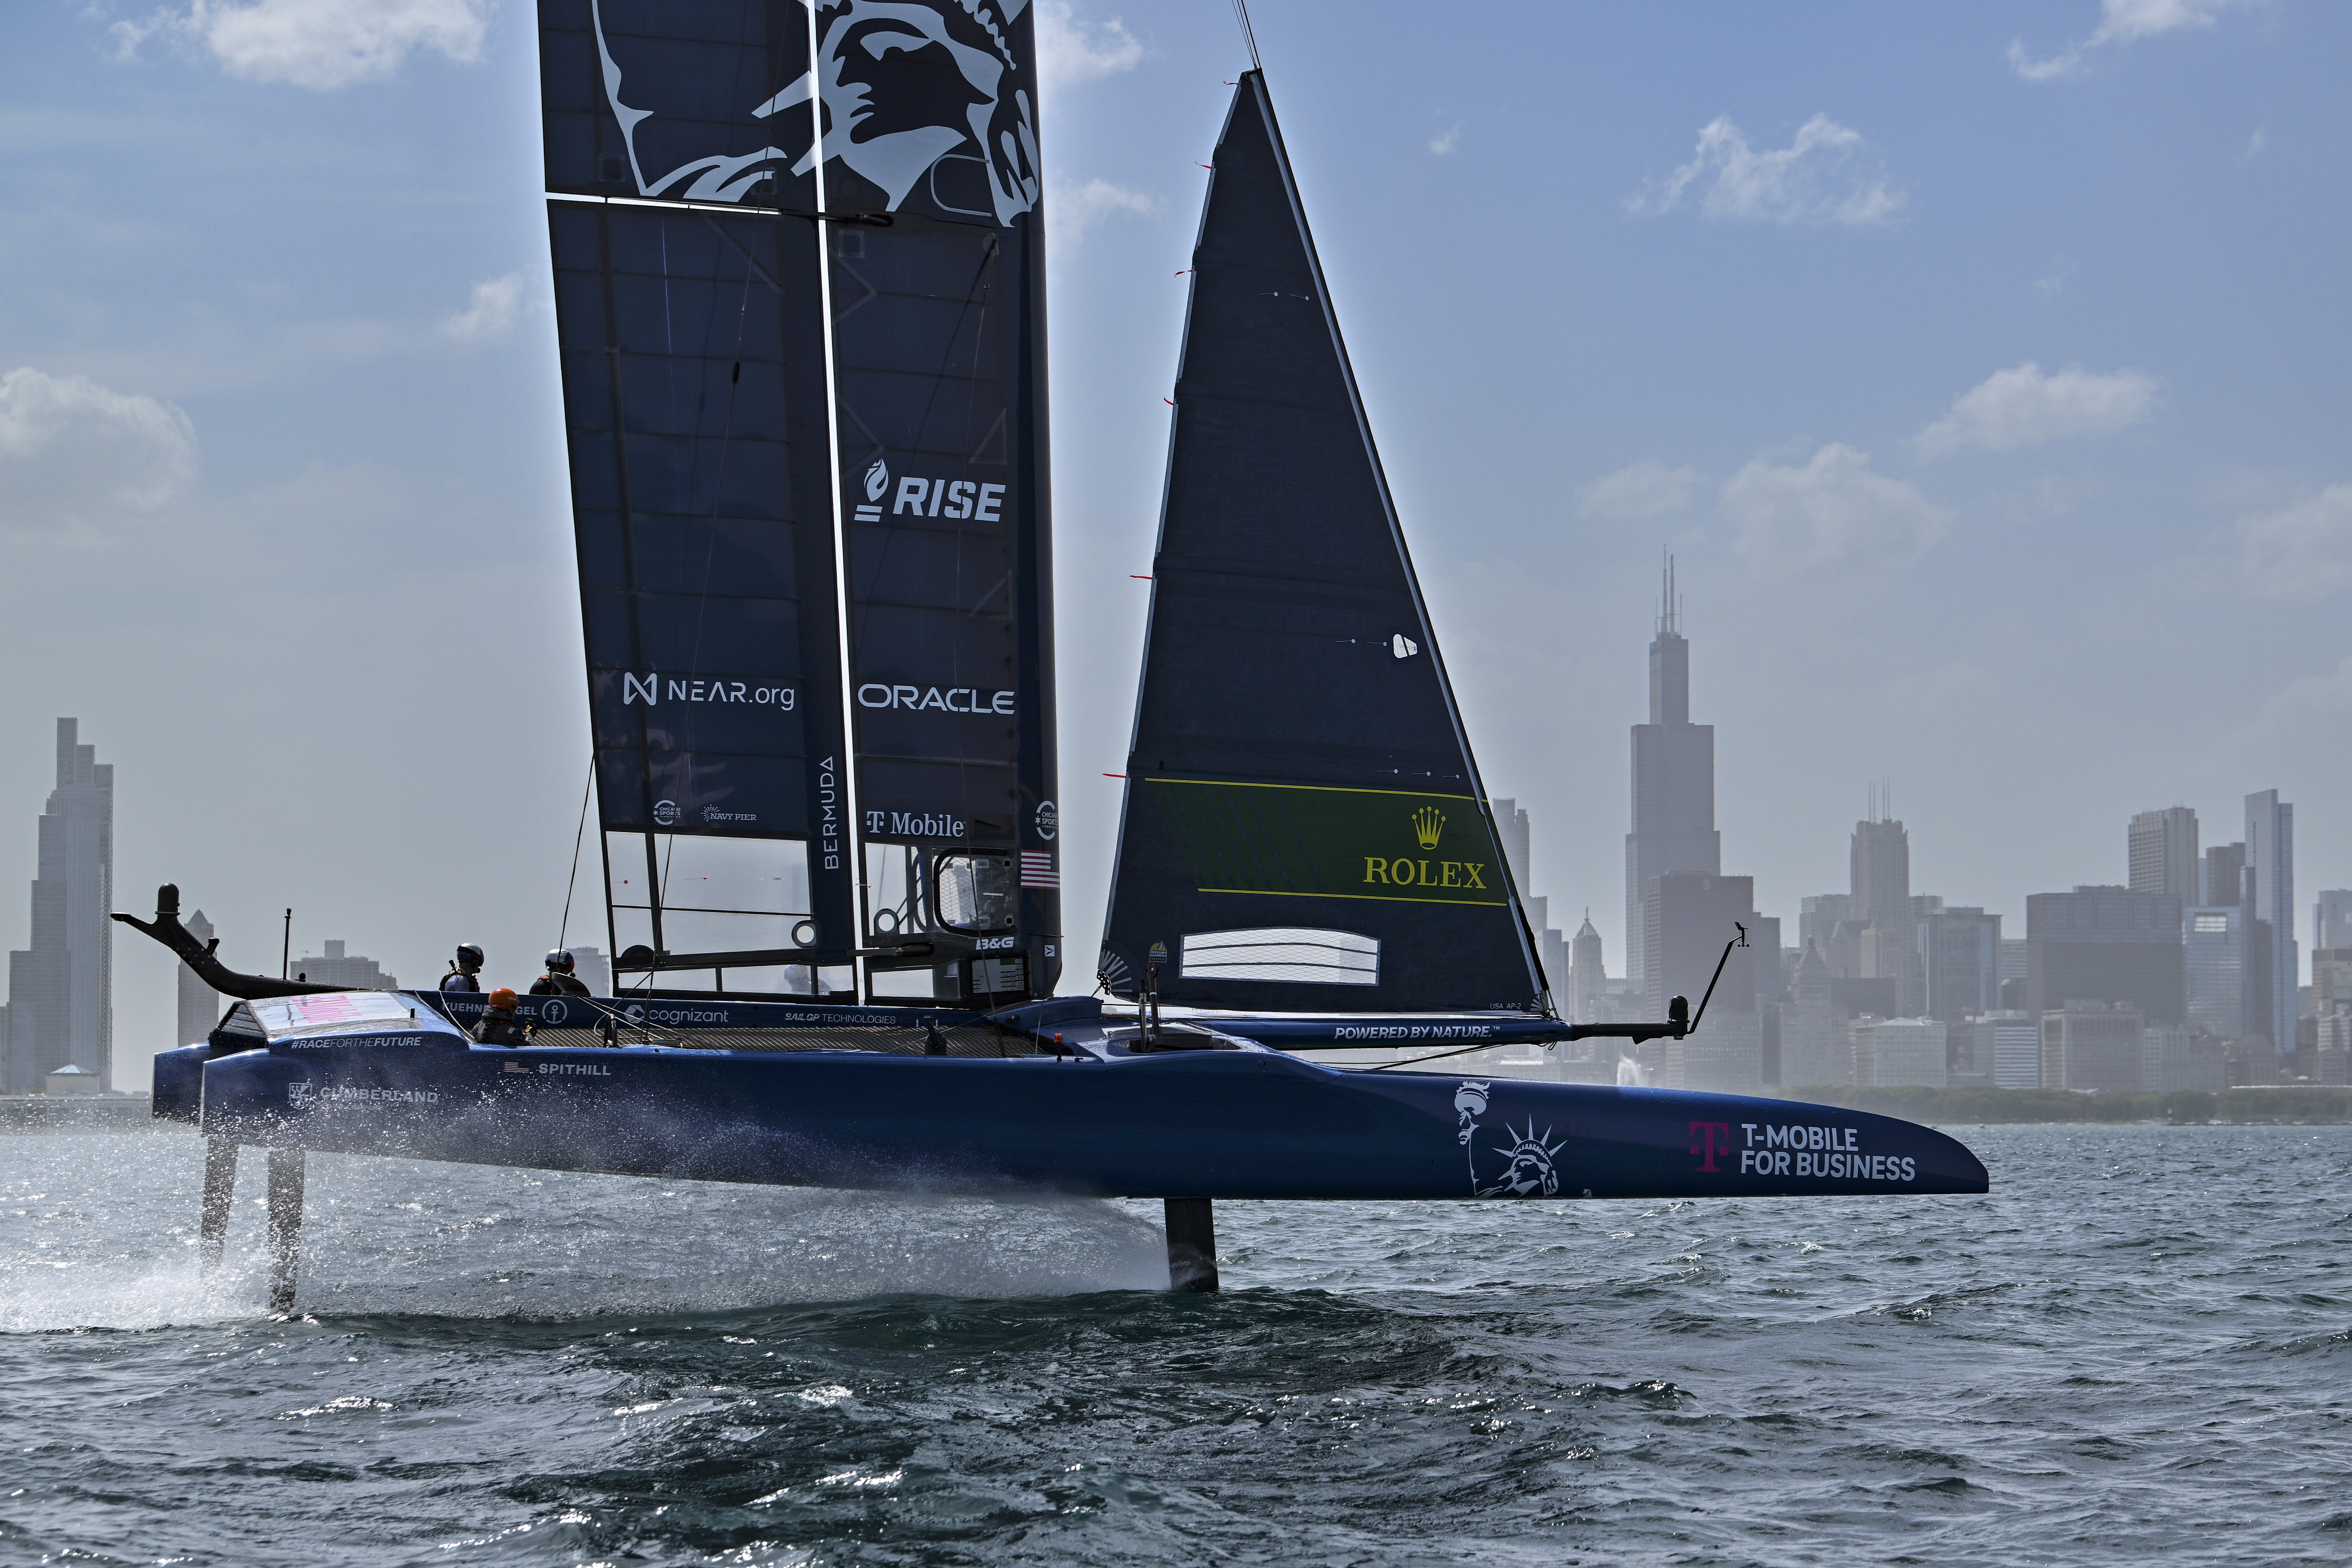 US Sail GP Chicago Live stream, TV schedule, how to watch sailing grand prix for free